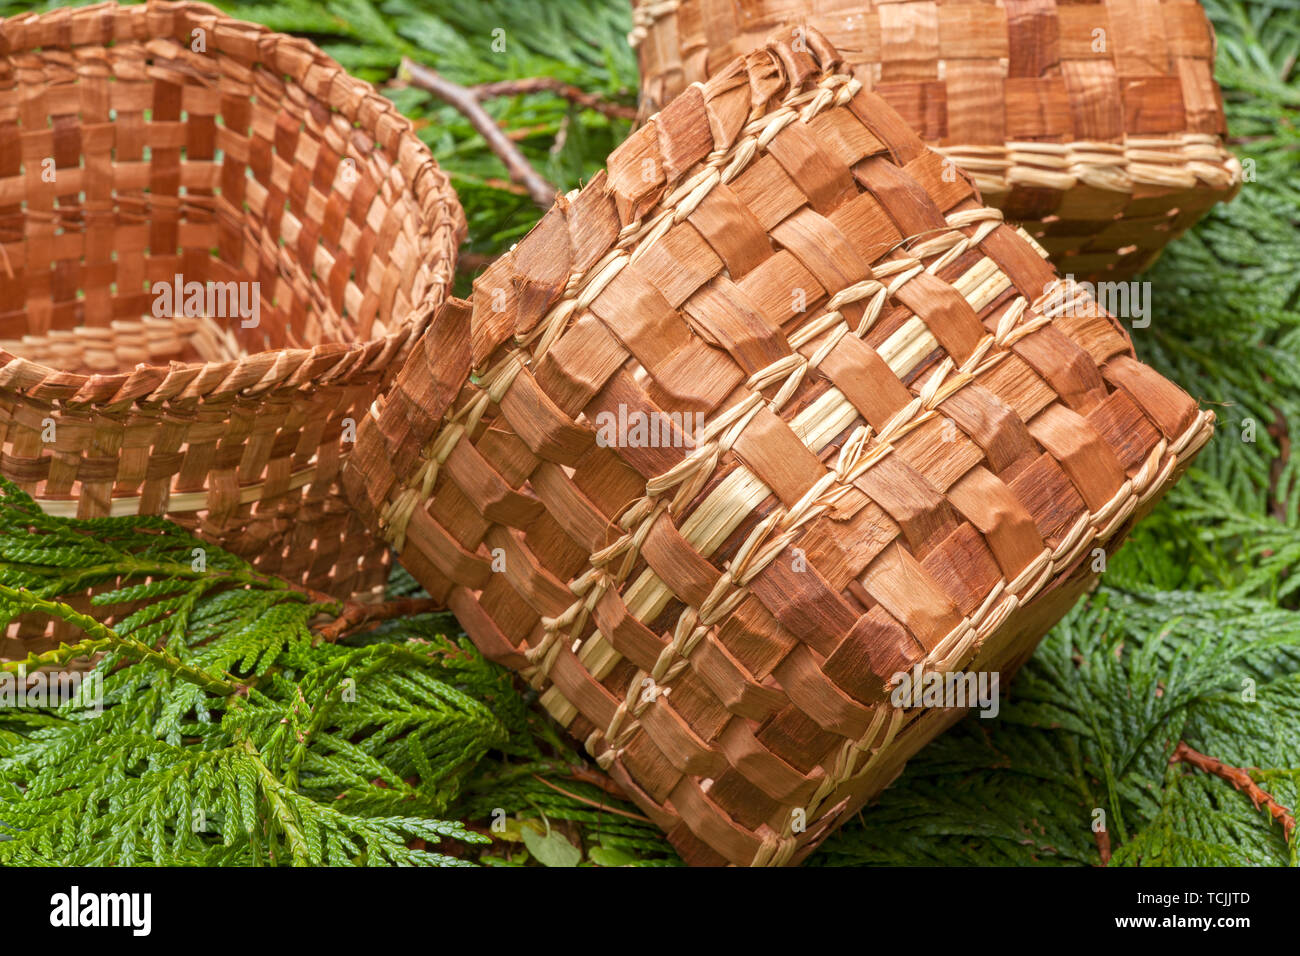 Three handmade Western Red Cedar baskets woven from strips of inner bark, lying on Western Red Cedar branches Stock Photo